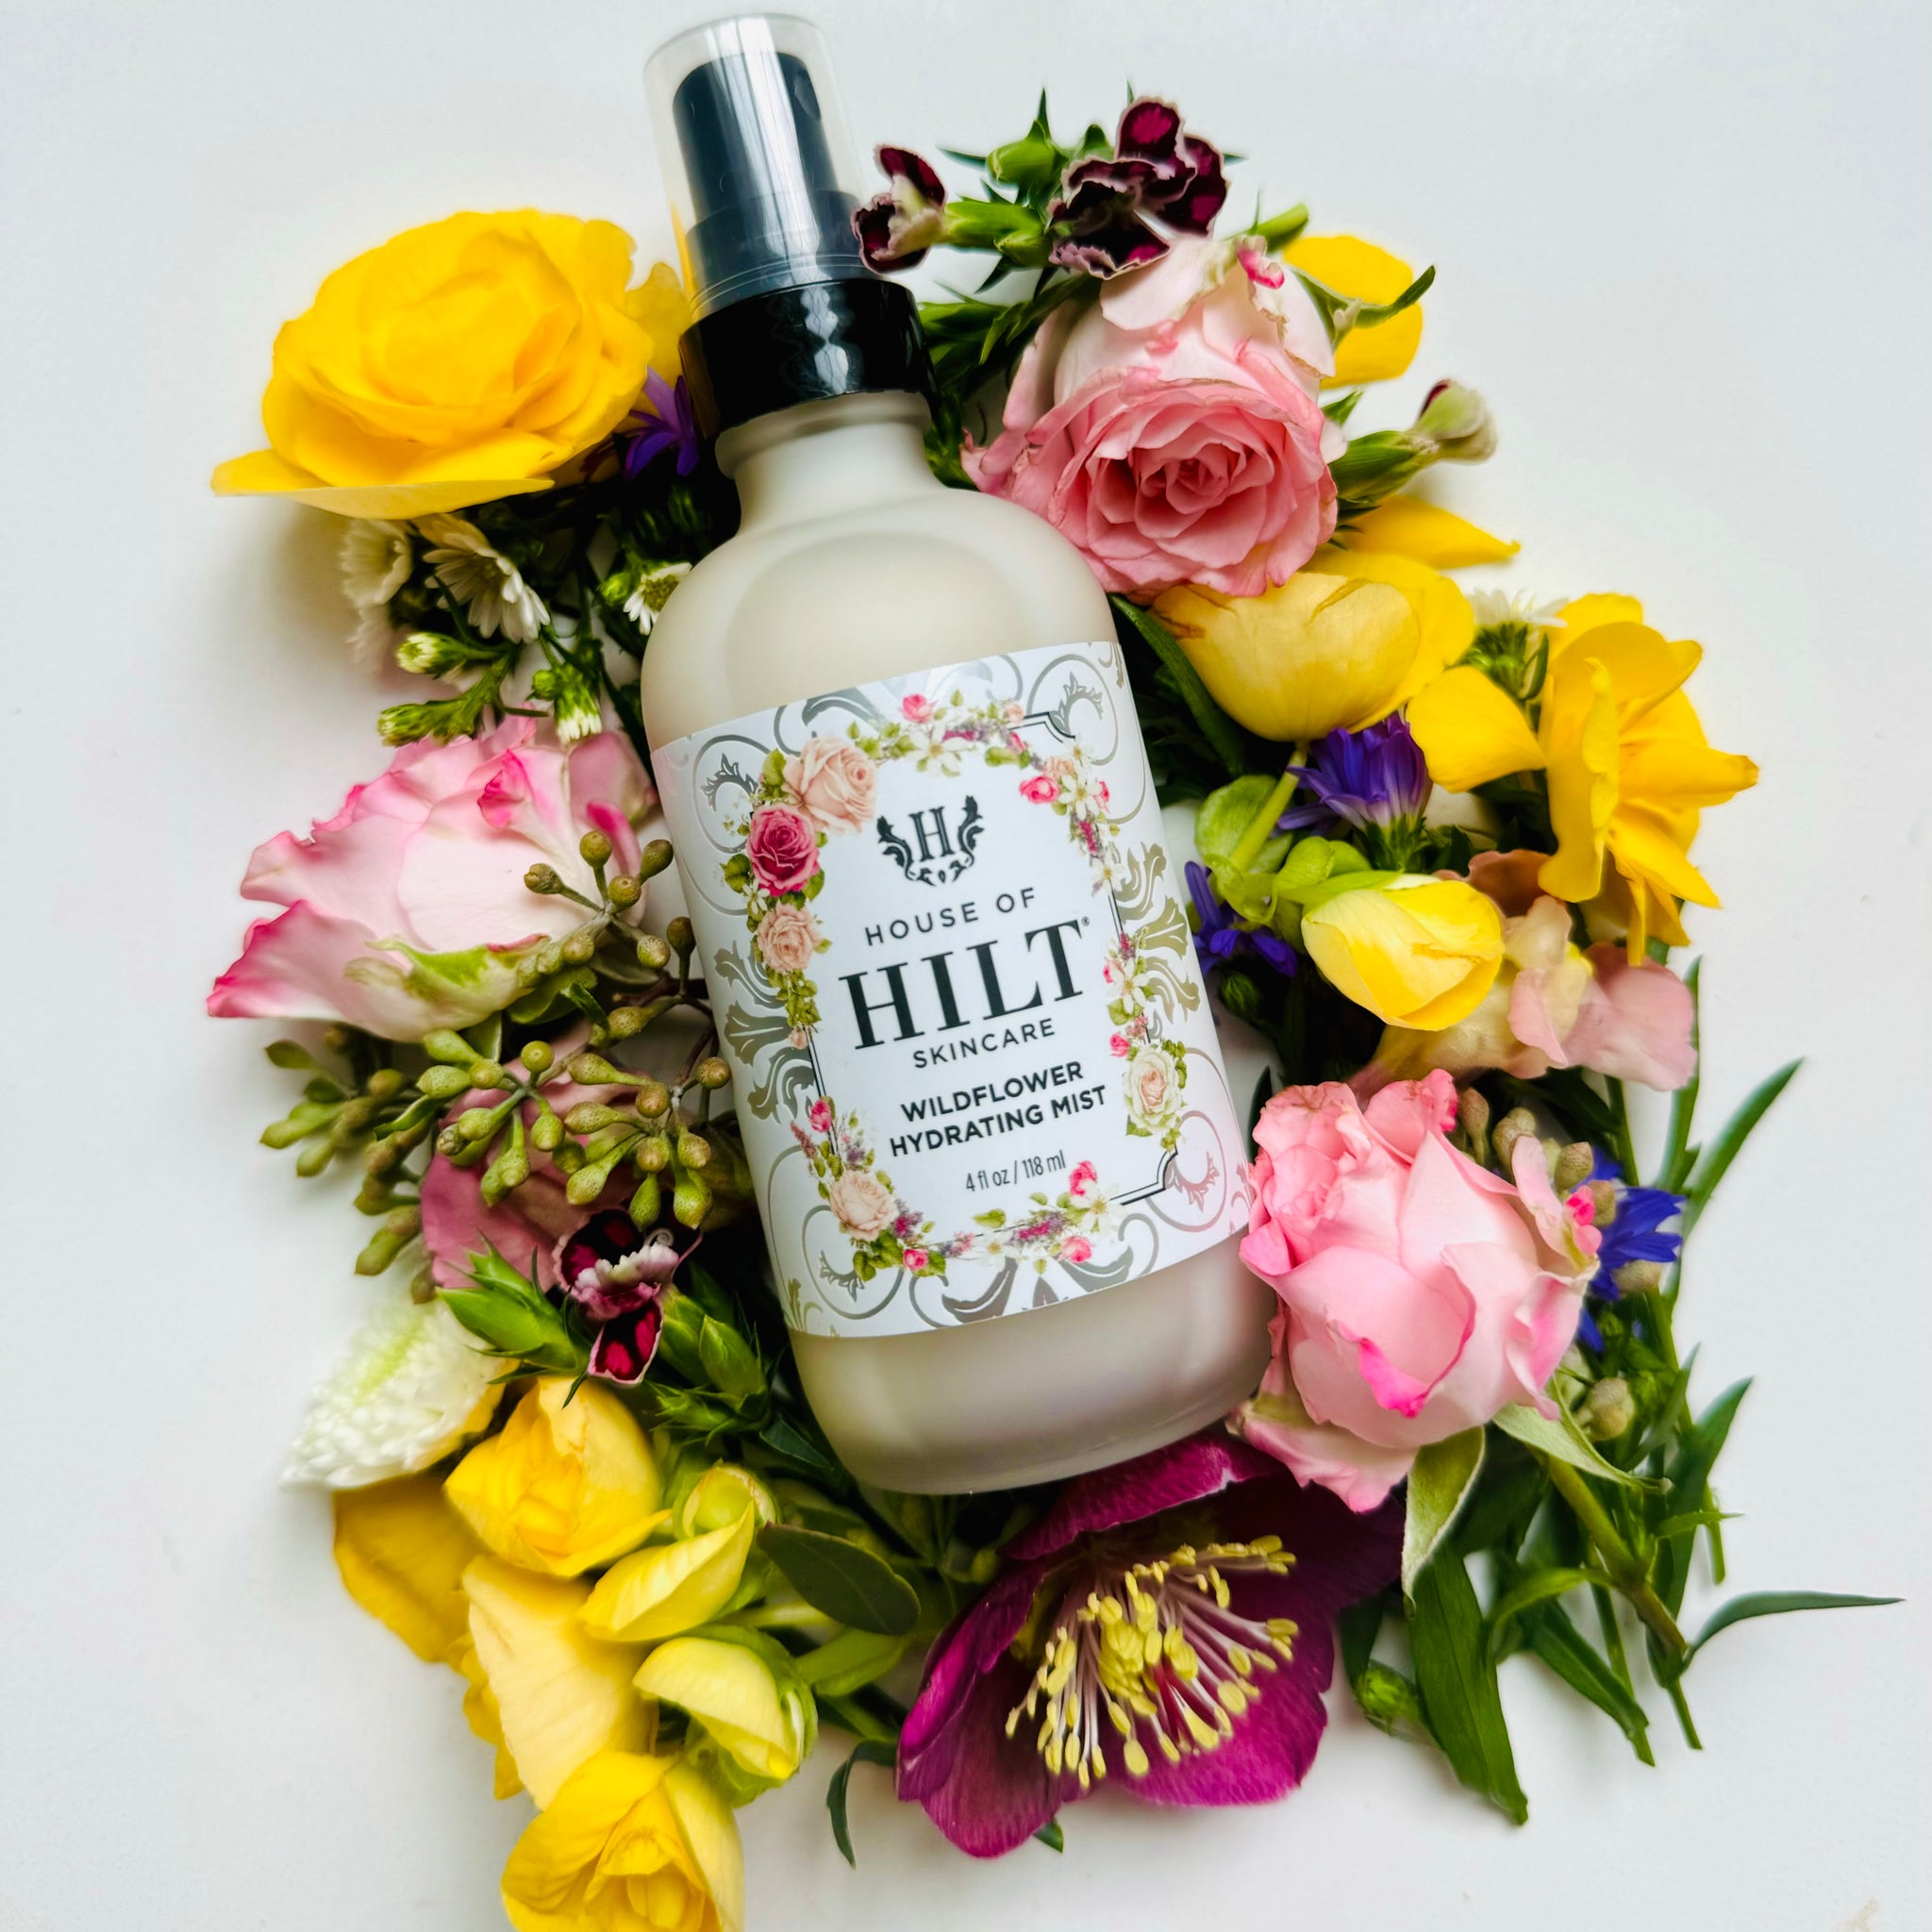 INTRODUCING THE WILDFLOWER HYDRATING MIST!